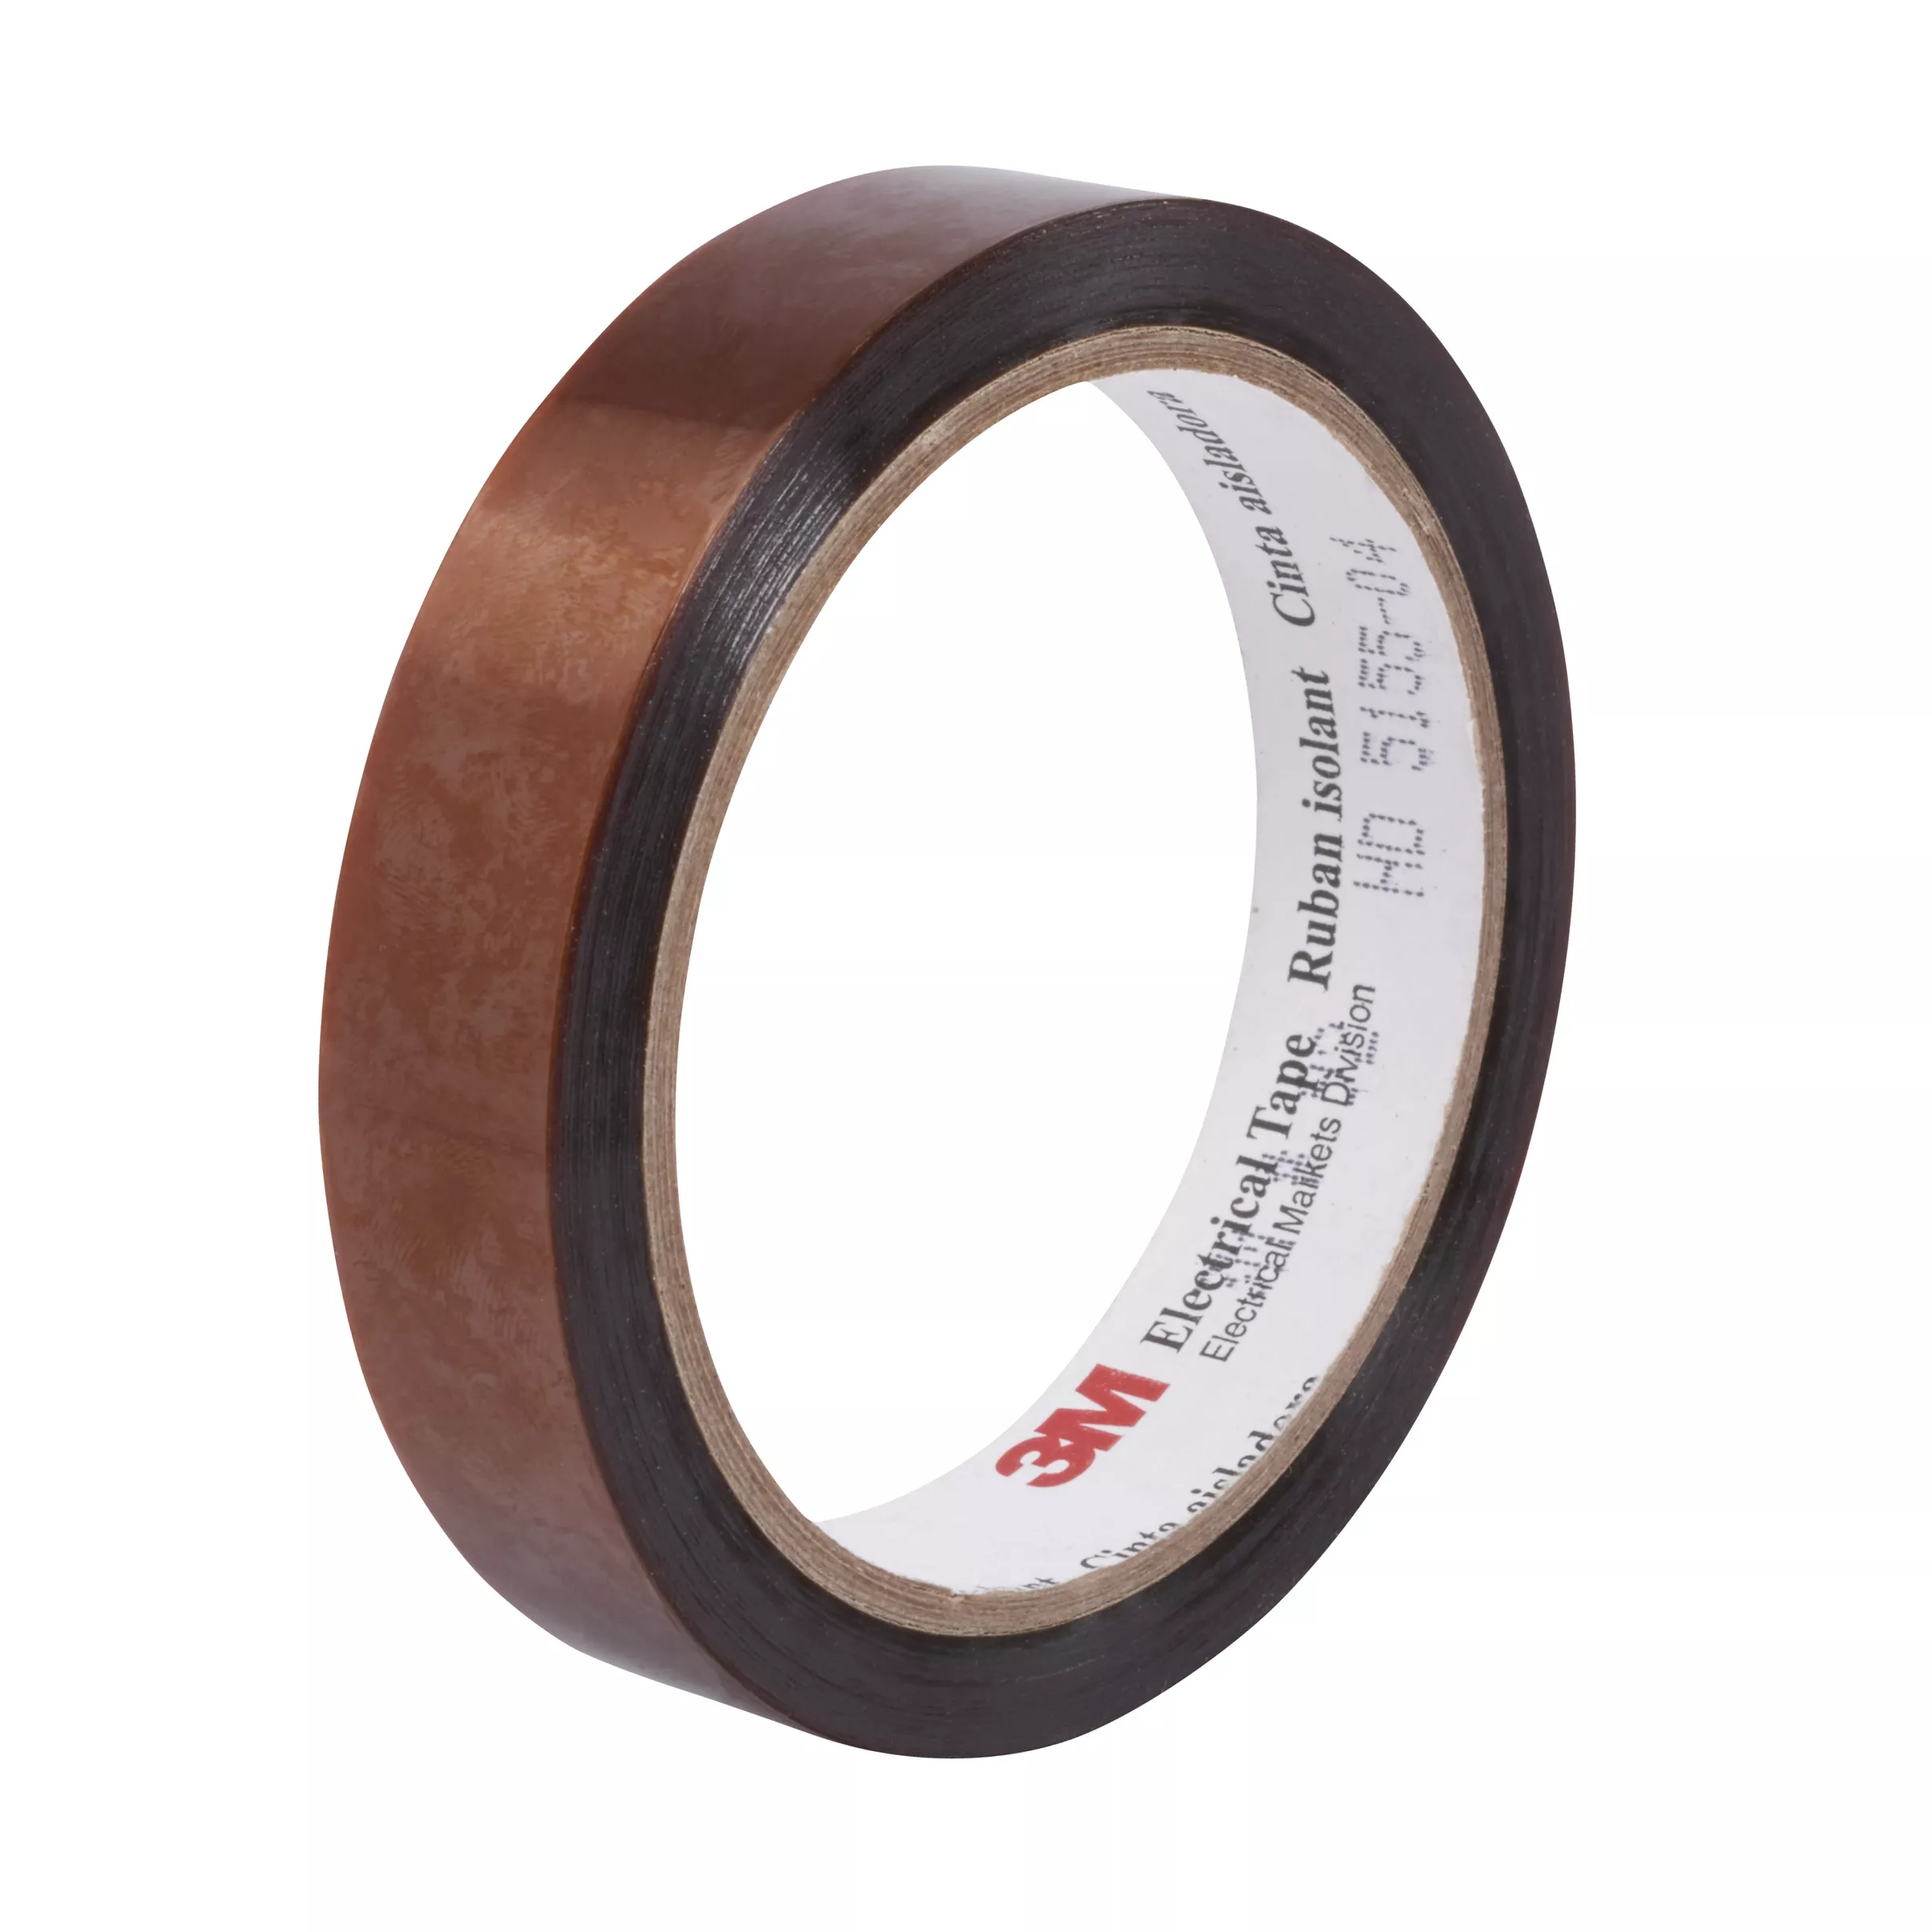 SKU 7000058468 | 3M™ Polyimide Film Electrical Tape 92